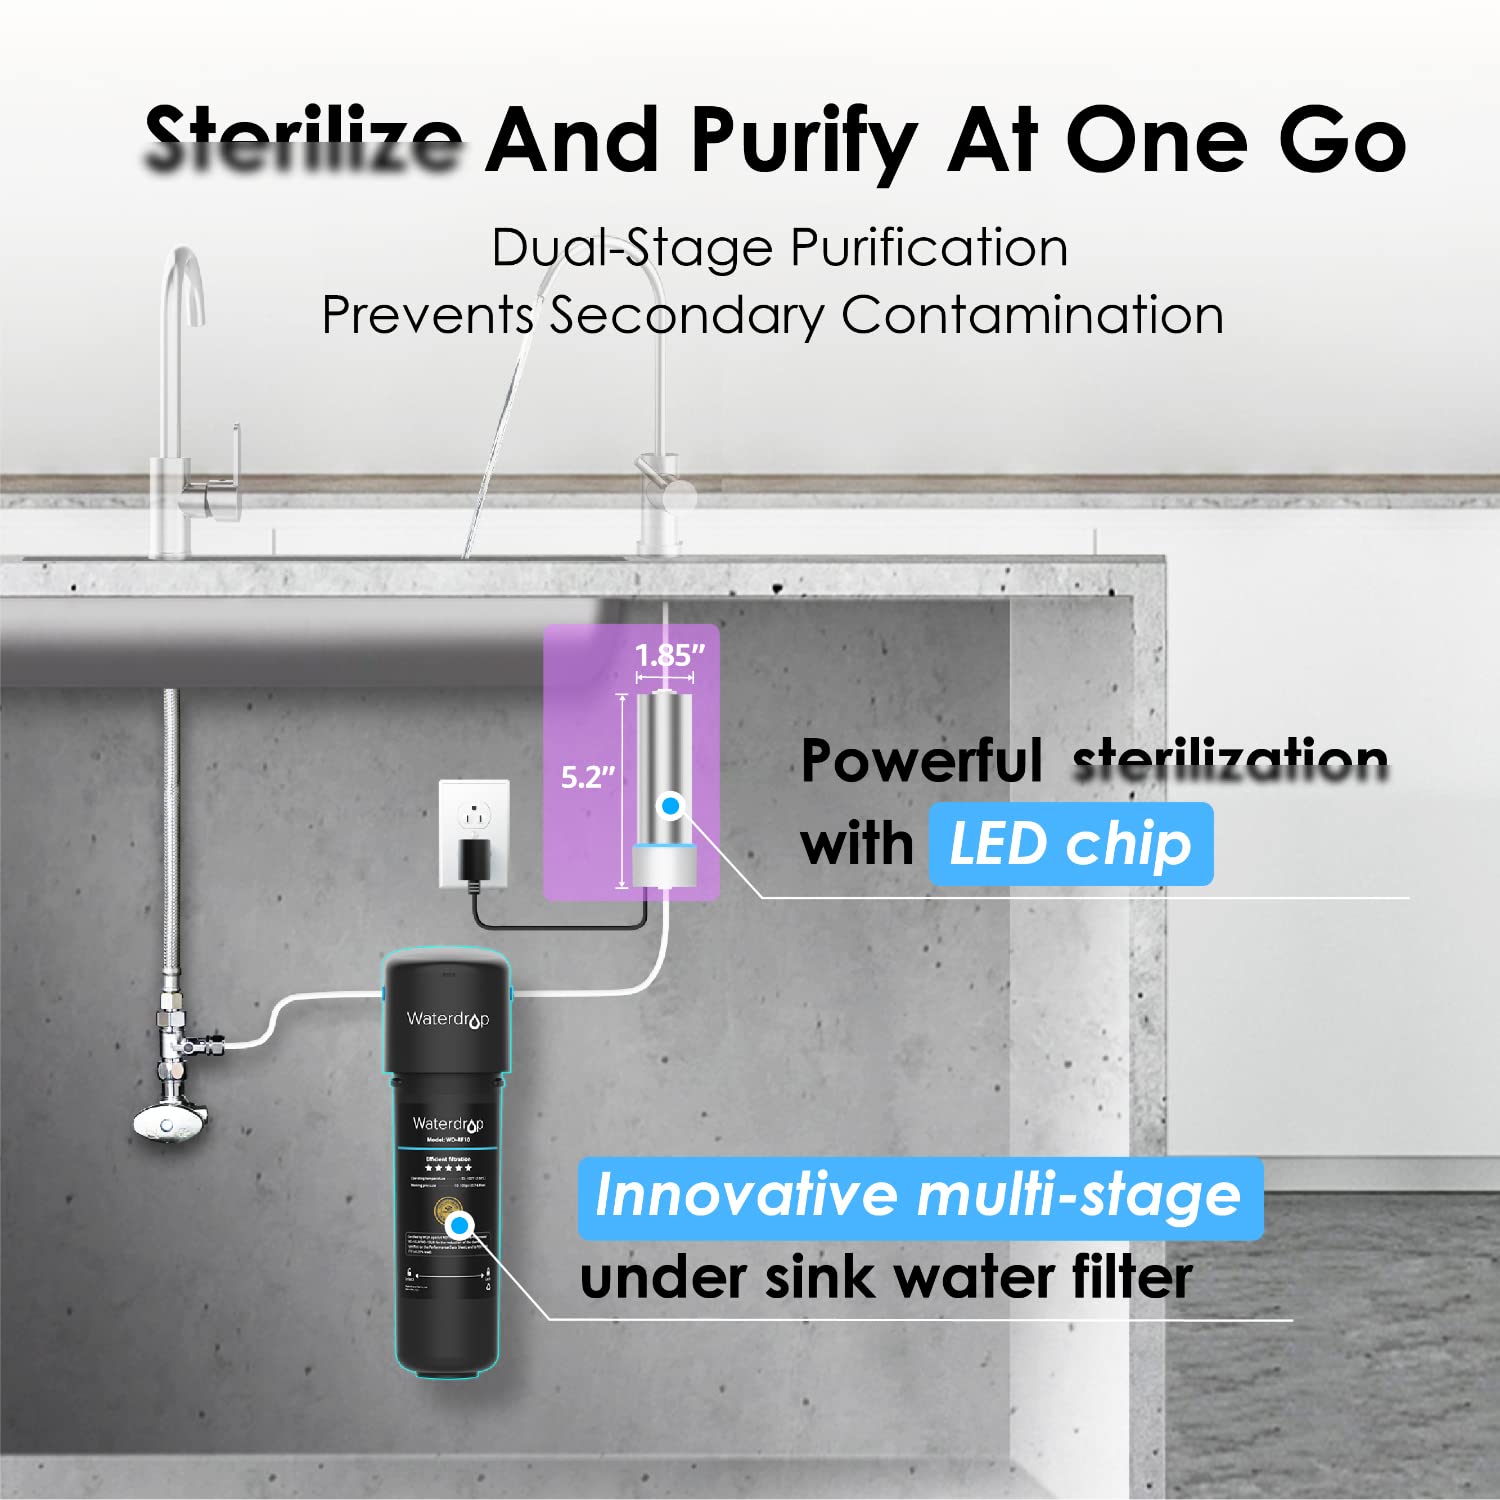 Waterdrop 17UB-UF 0.01 μm Ultra Filtration Under Sink Water Filter System and LED UV͎ Ultrąviolët Water Sterilizër Filter for Kitchen, Mercury-Free, FCC Certified, Stainless Steel, 50 Years Life Time